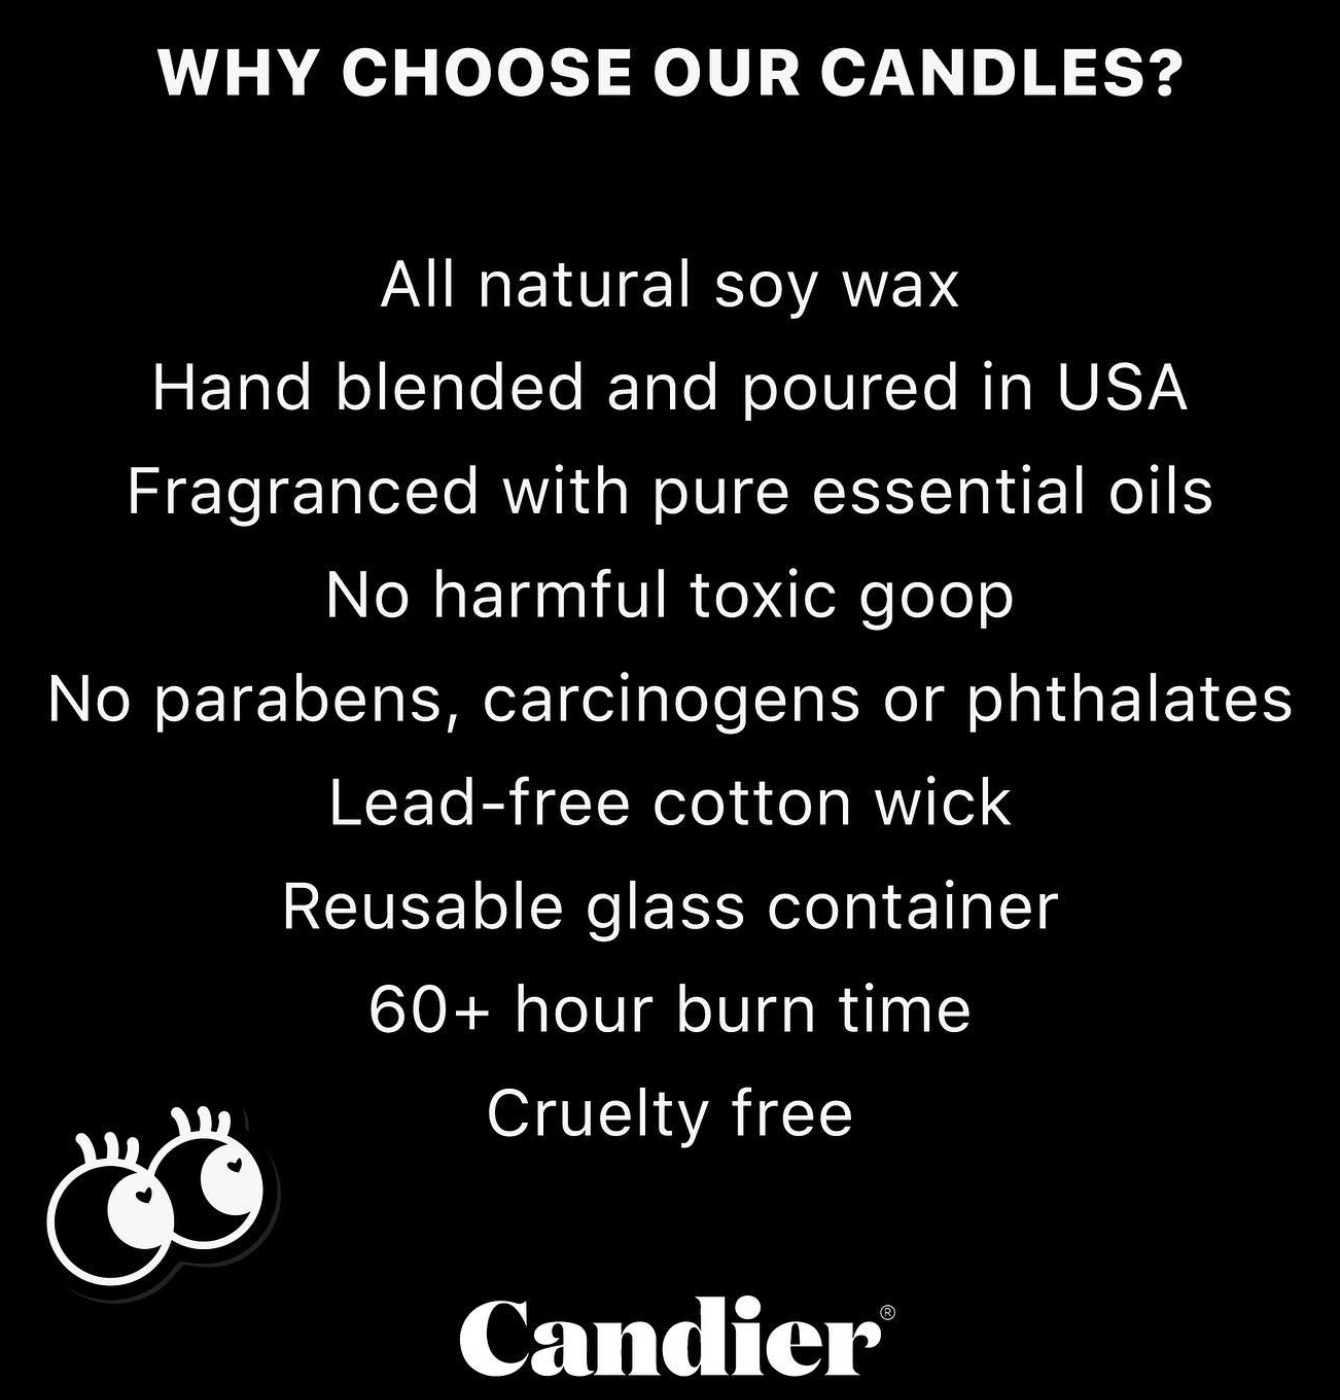 Candier "BE YOUR OWN SUGAR DADDY" 100% soy candles